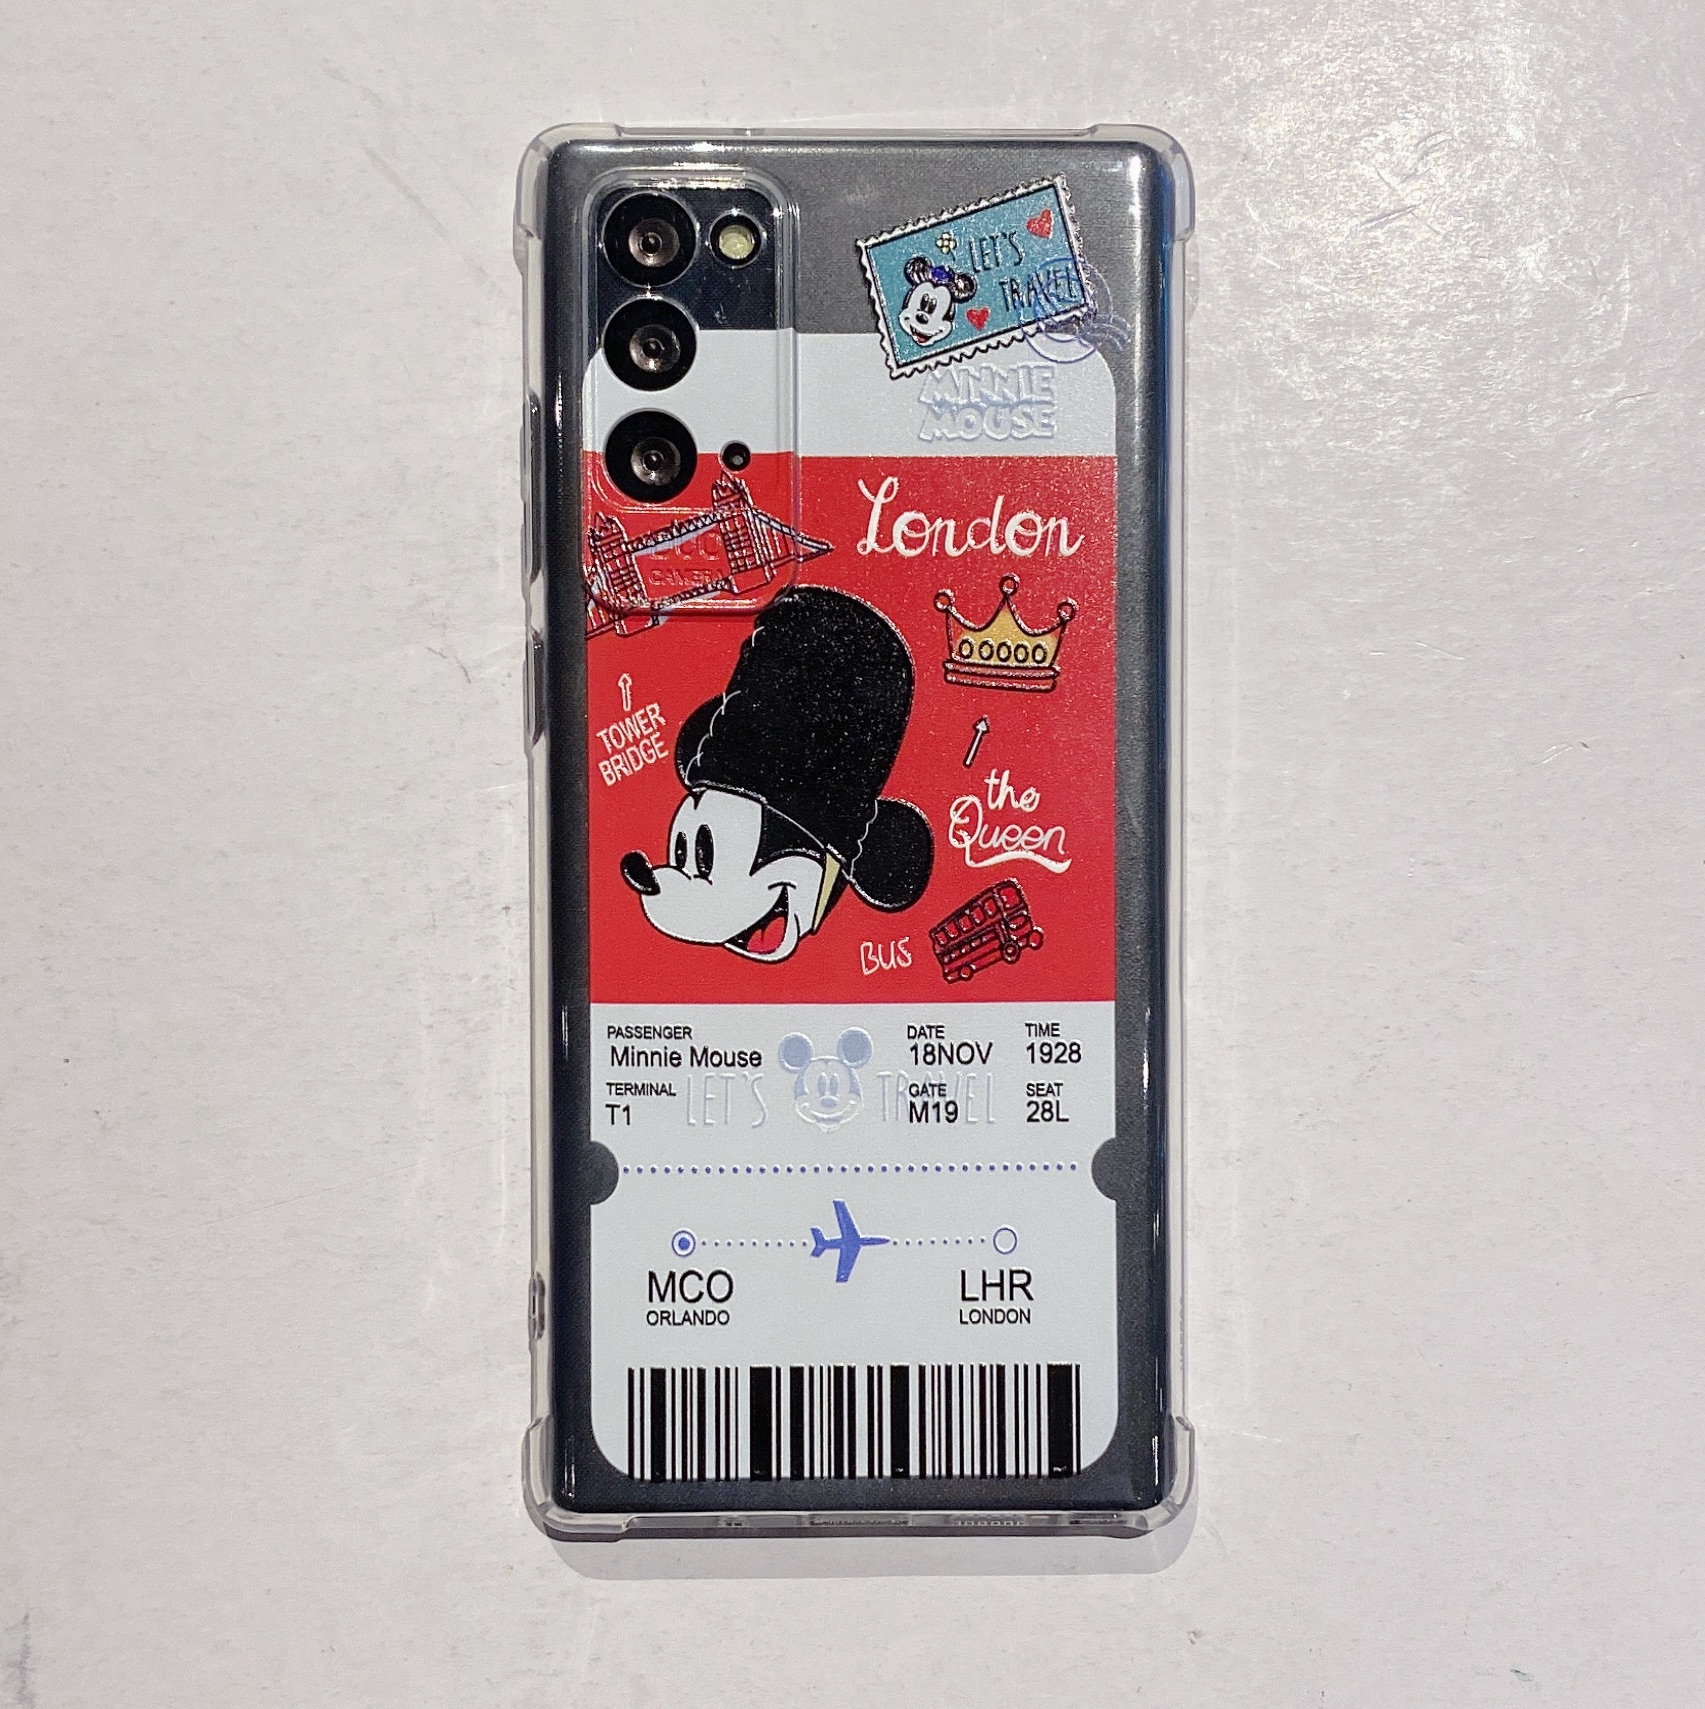 6D Airbag Anti-drop Airplane Label Mickey Mouse Pattern Mobile Phone Case for Samsung S8 S9 S10 S20Plus S10Lite Note 8 9 10 10Pro 10Lite